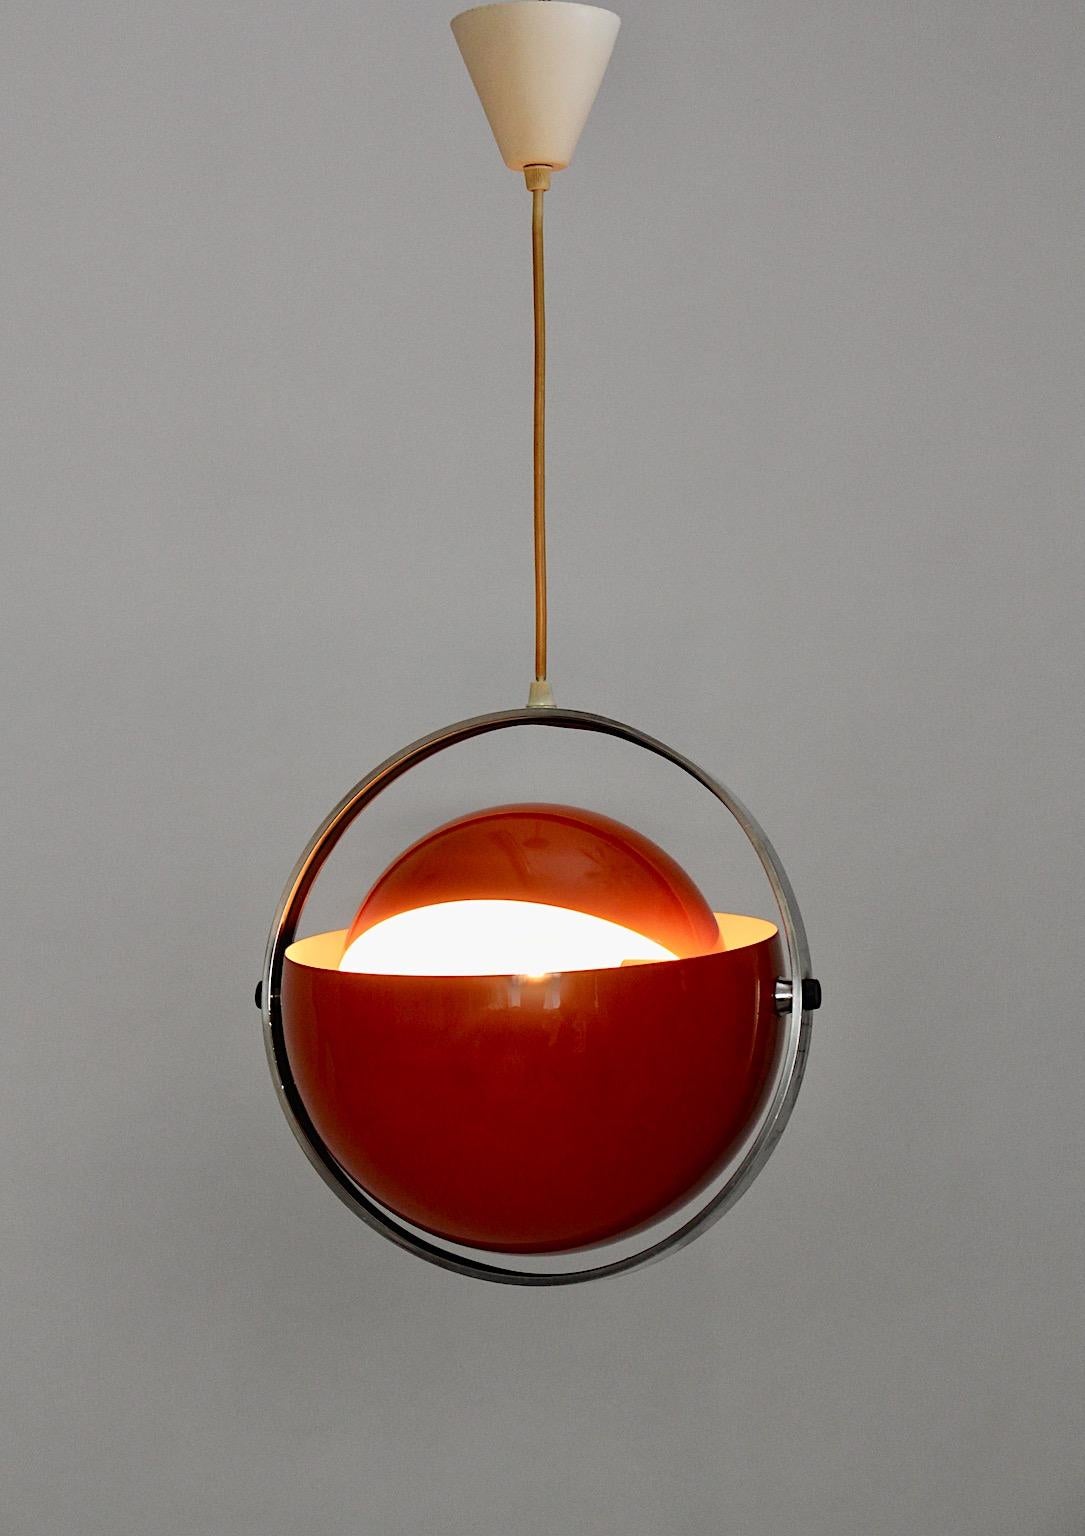 Space Age vintage chandelier or pendant model Moon designed 1970s Denmark by Flemming Brylle & Preben Jacobsen from metal in lipstick like orange coral color tone with ivory colored interior.
An amazing pendant in beautiful red color tone.
The